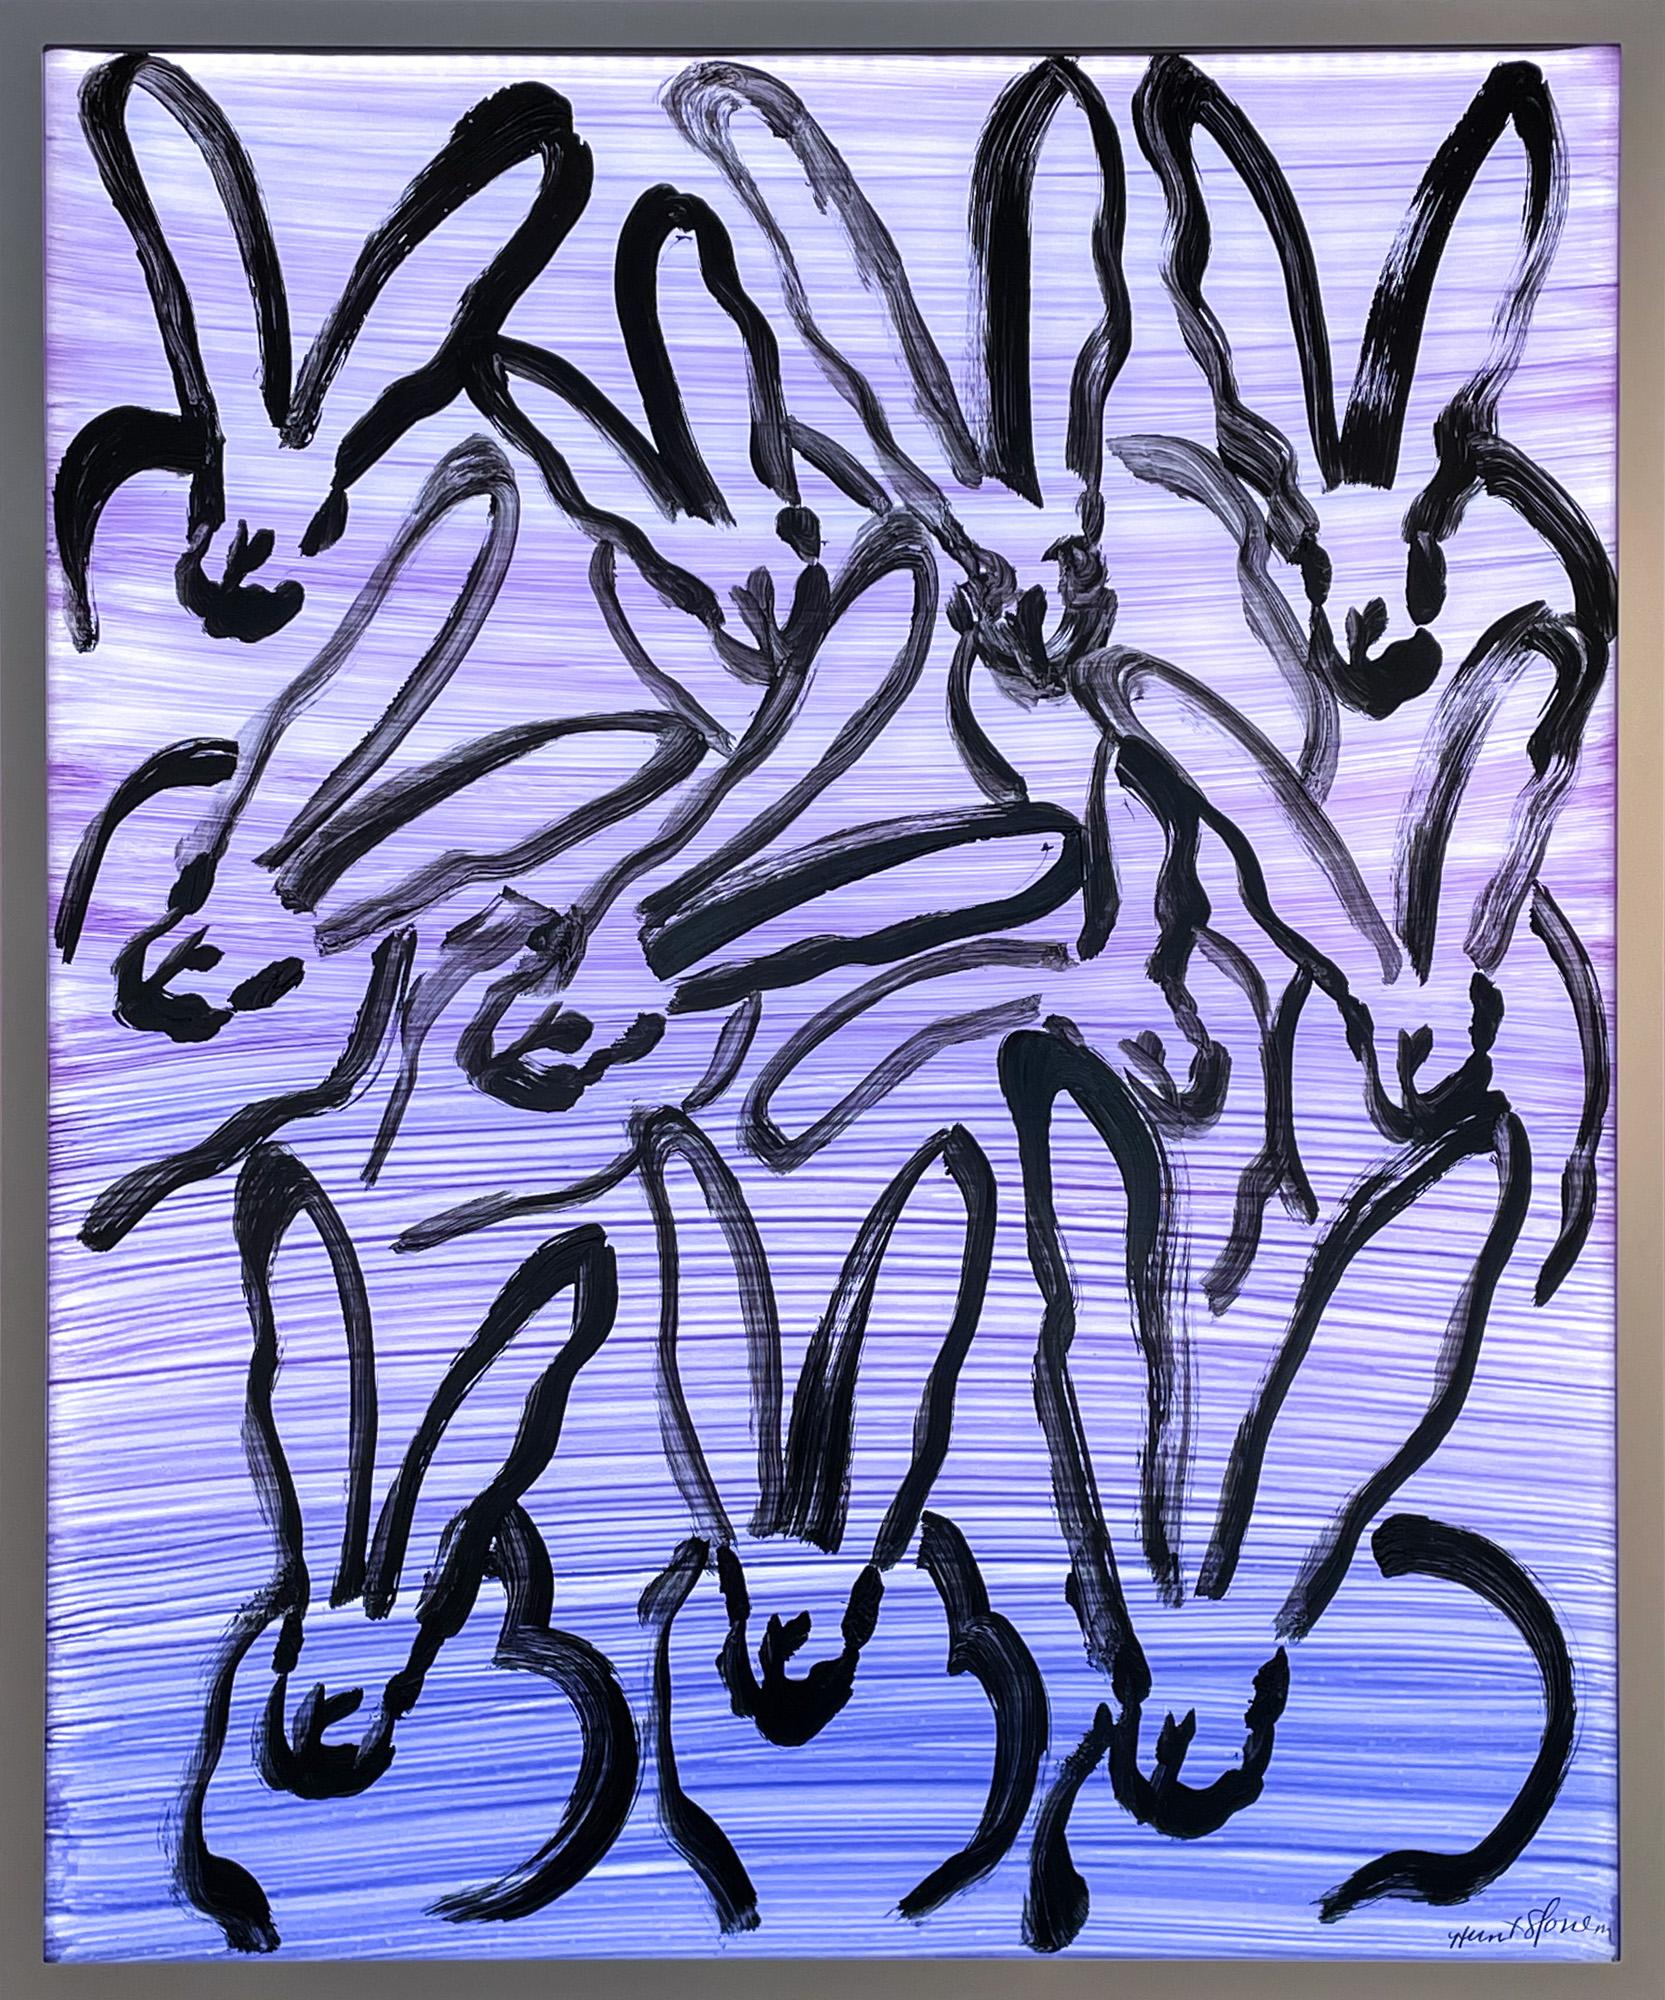 Hunt Slonem LED Lightbox with acrylic painted bunnies and pink and purple ombre. A nearby electrical outlet is required for installation.

Inspired by nature and his 60 pet birds, Hunt Slonem is renowned for his distinct neo- expressionist style. He